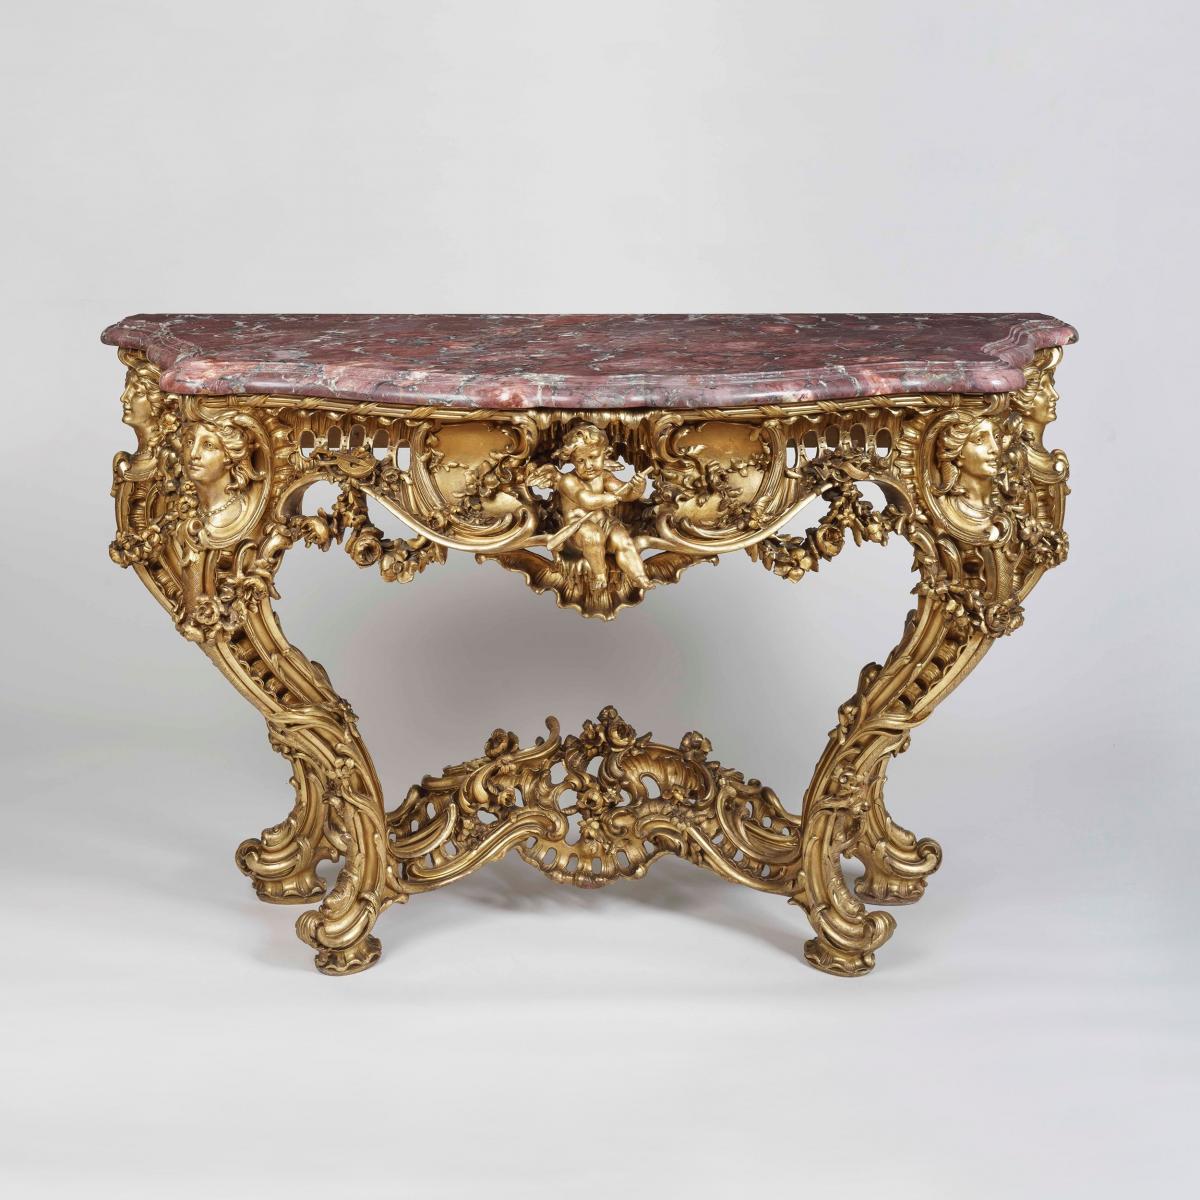 A Louis XV Style Console Table In the Manner of Nicolas Pineau